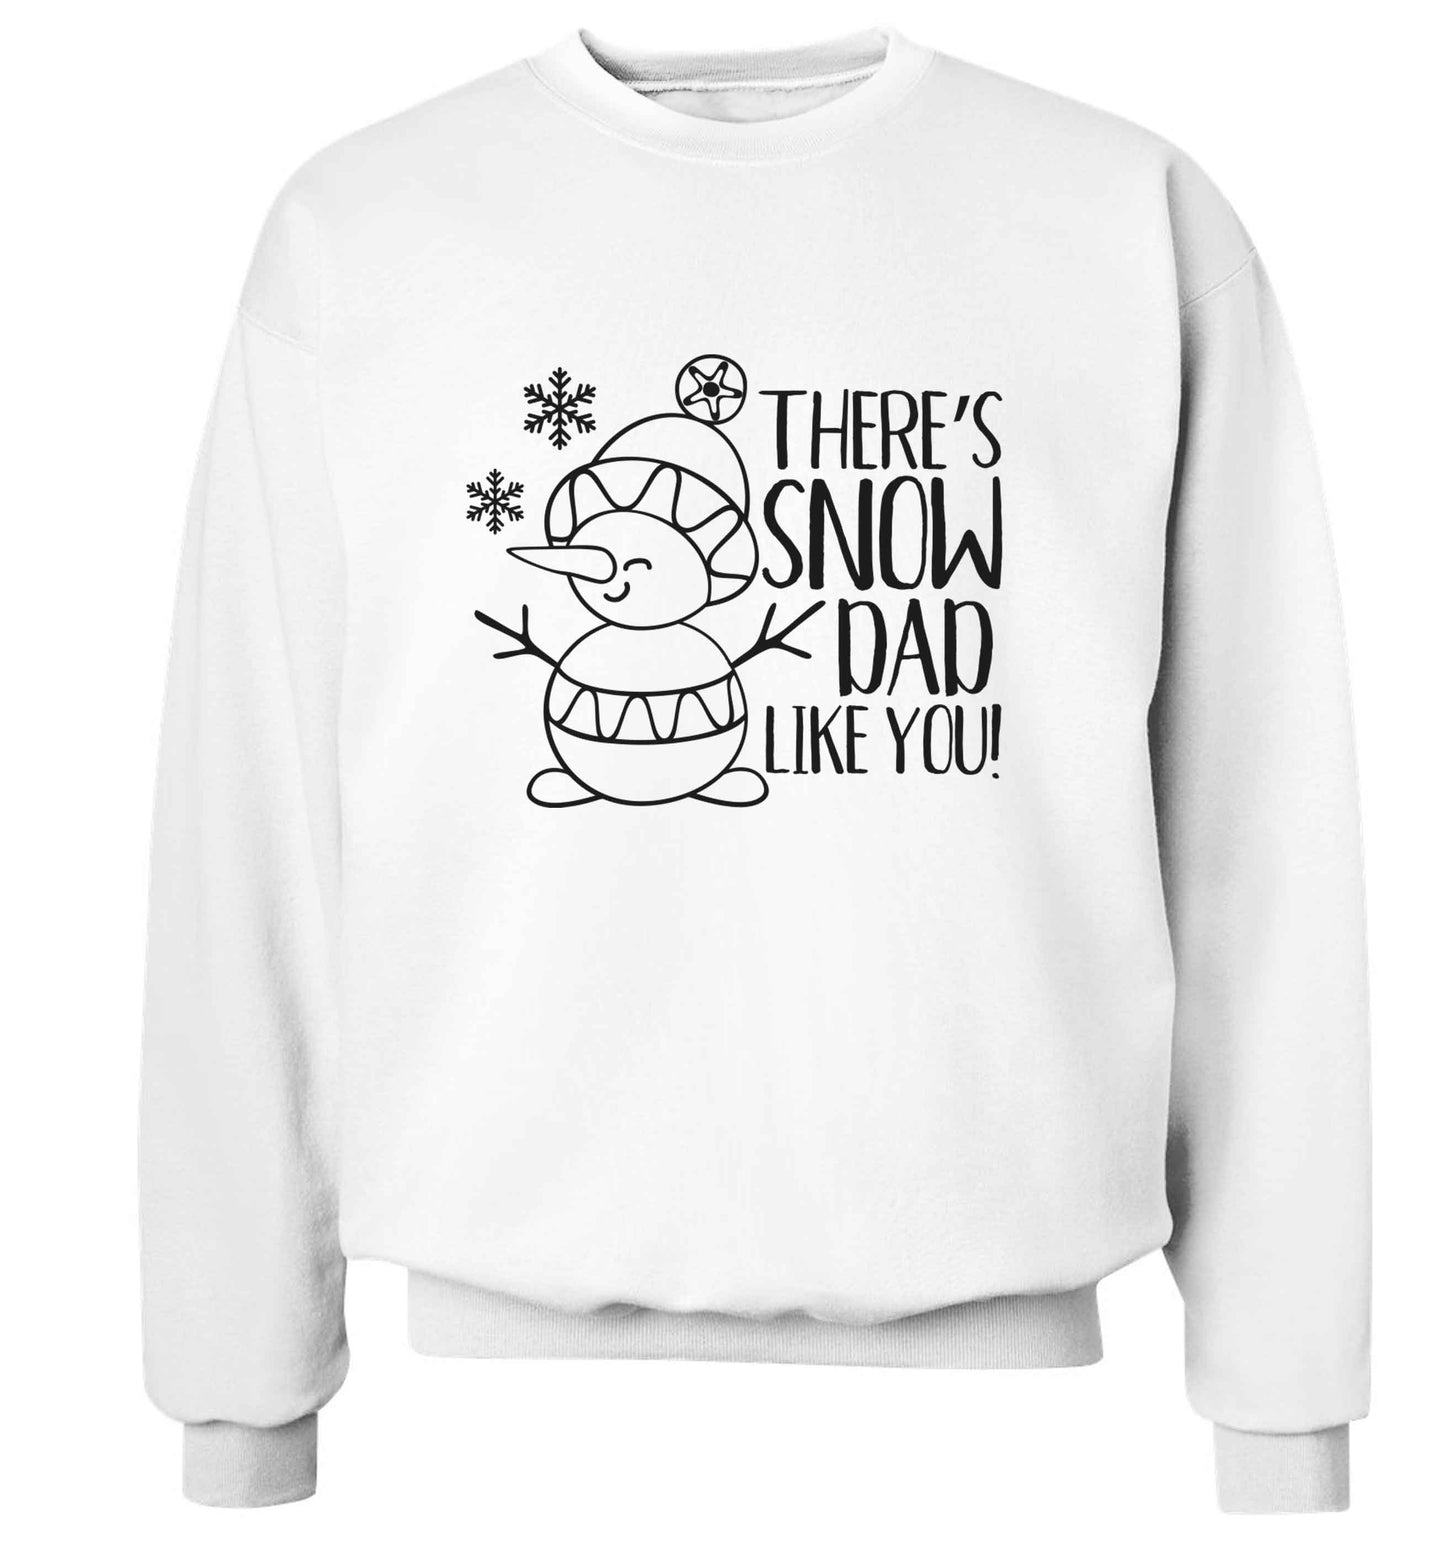 There's snow dad like you adult's unisex white sweater 2XL